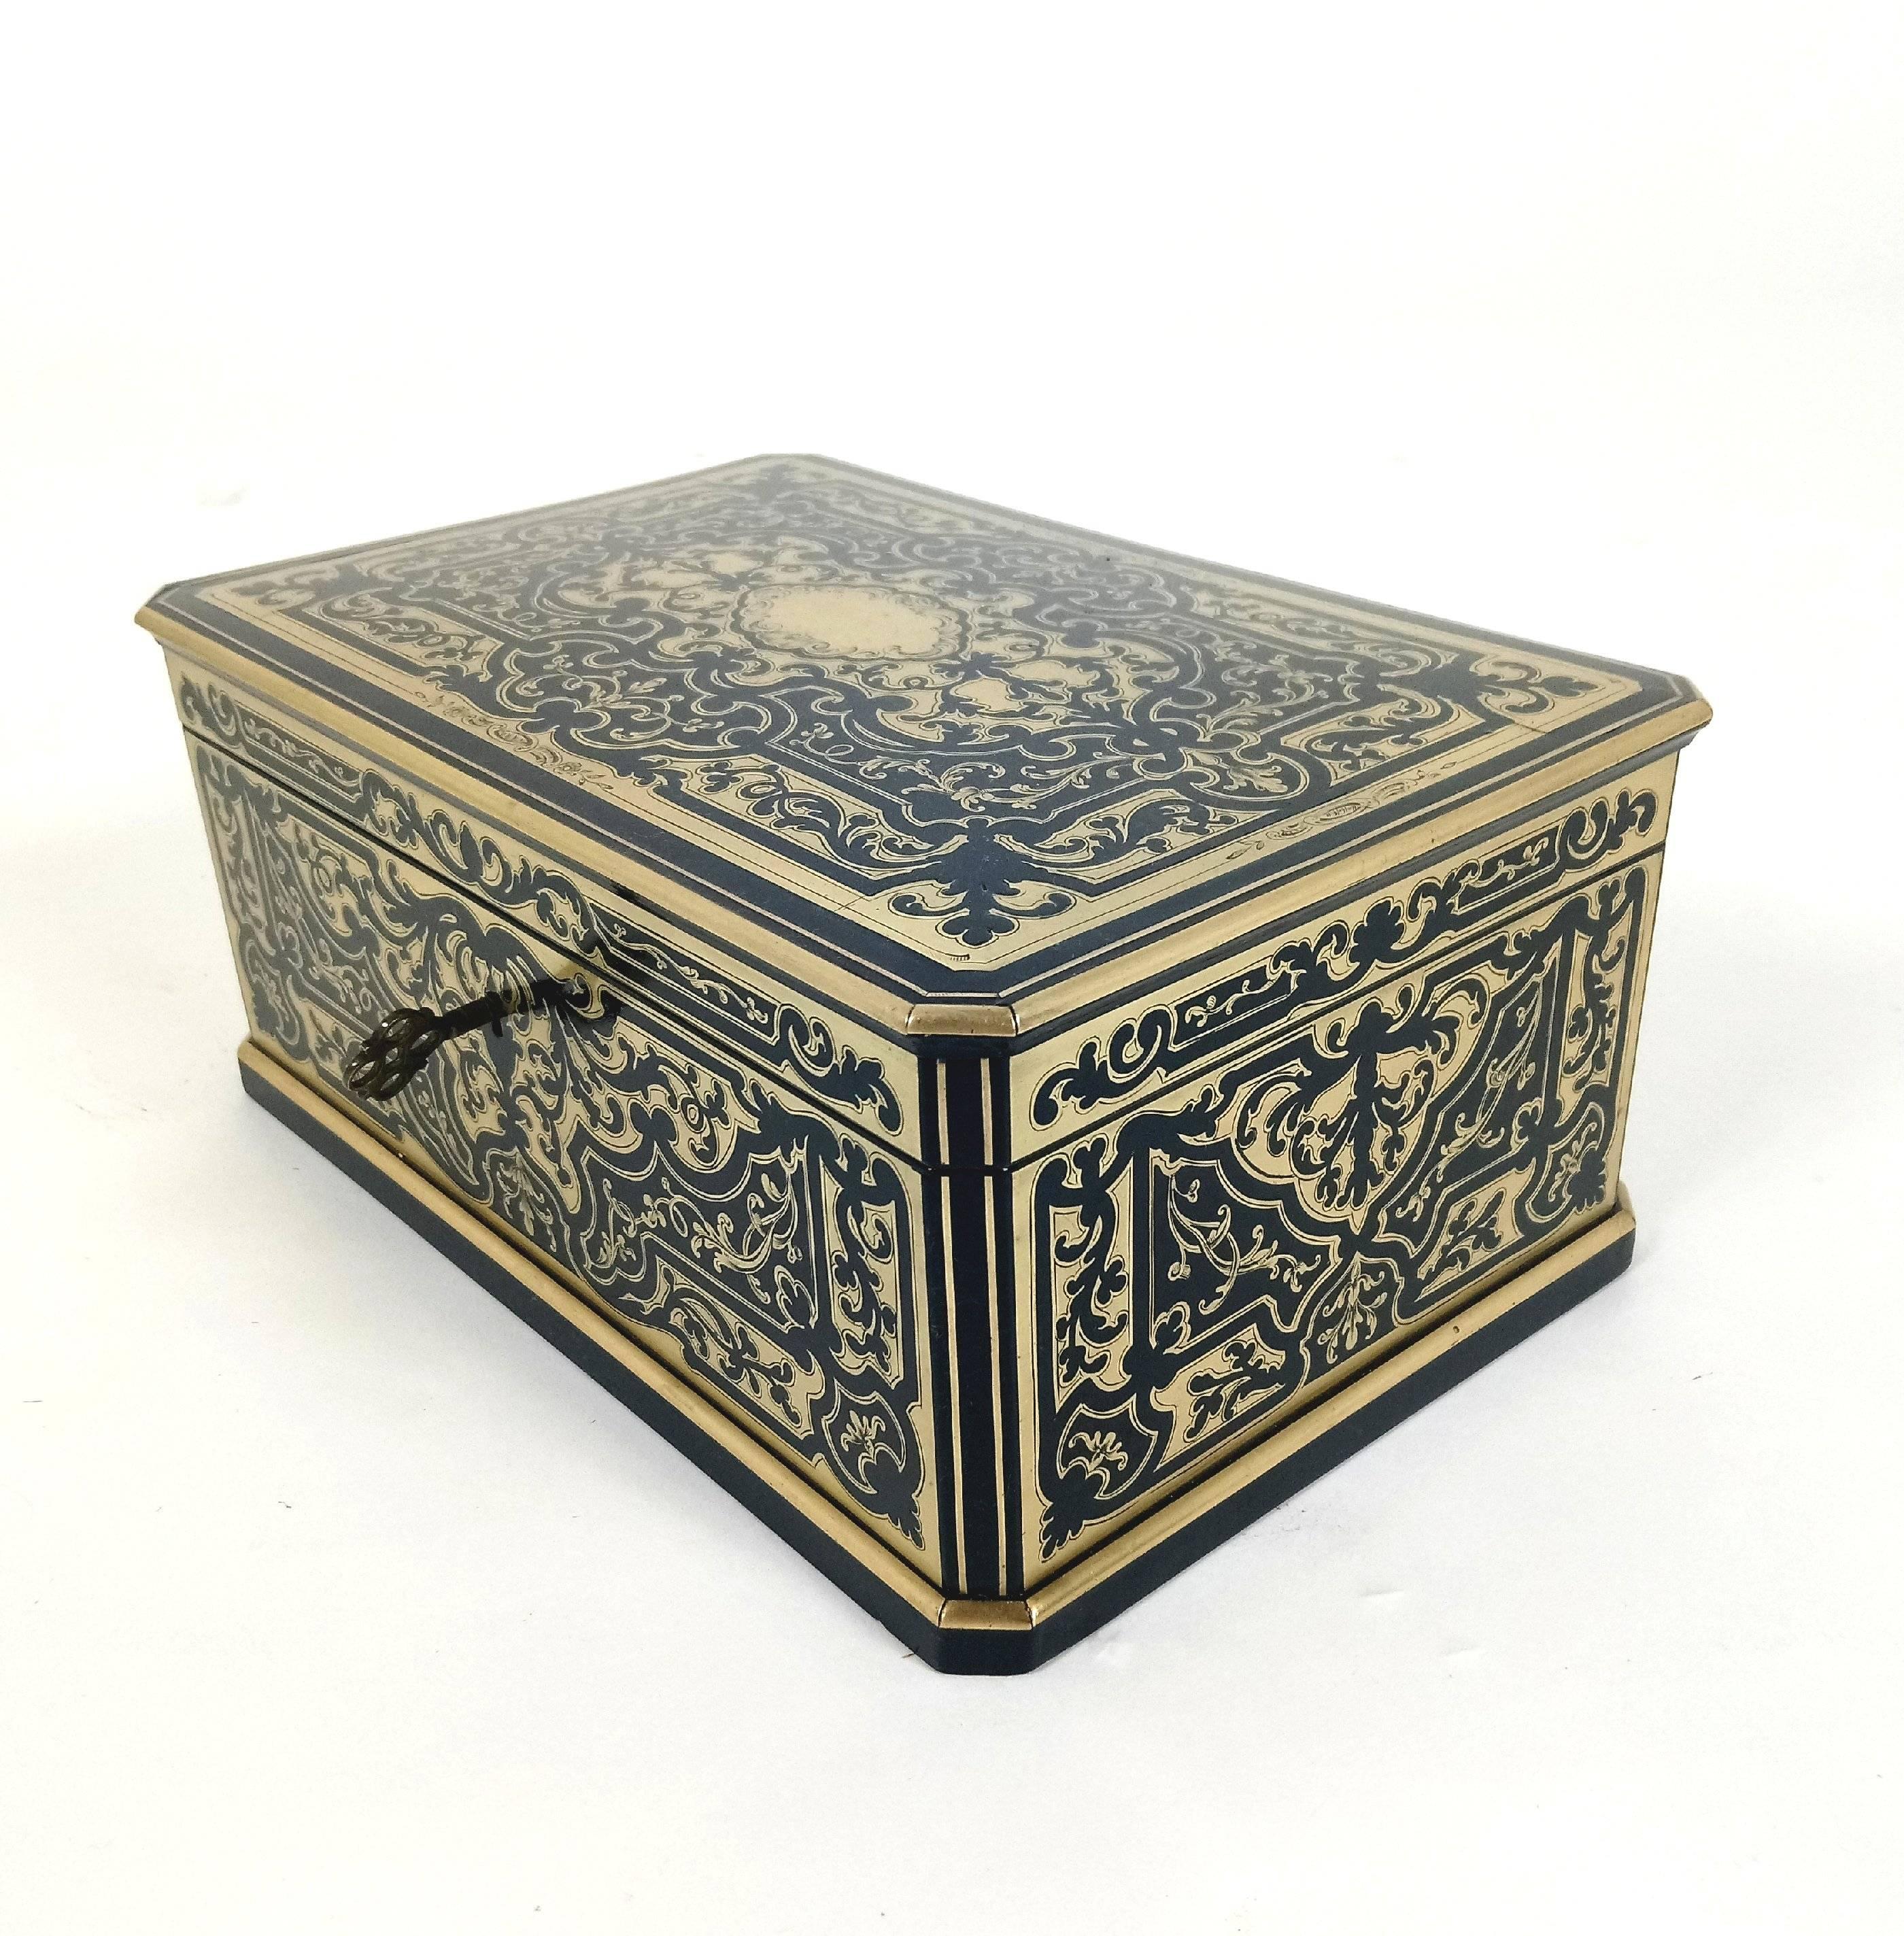 This superb mid-19th century French Boulle box by Tahan, Paris features the original lock and key, and signed on the lock plate. The box measures 10 in – 25 cm wide, 6 ½ in – 16.5 cm deep and 4 ½ in – 11.5 cm in height. This piece would make a